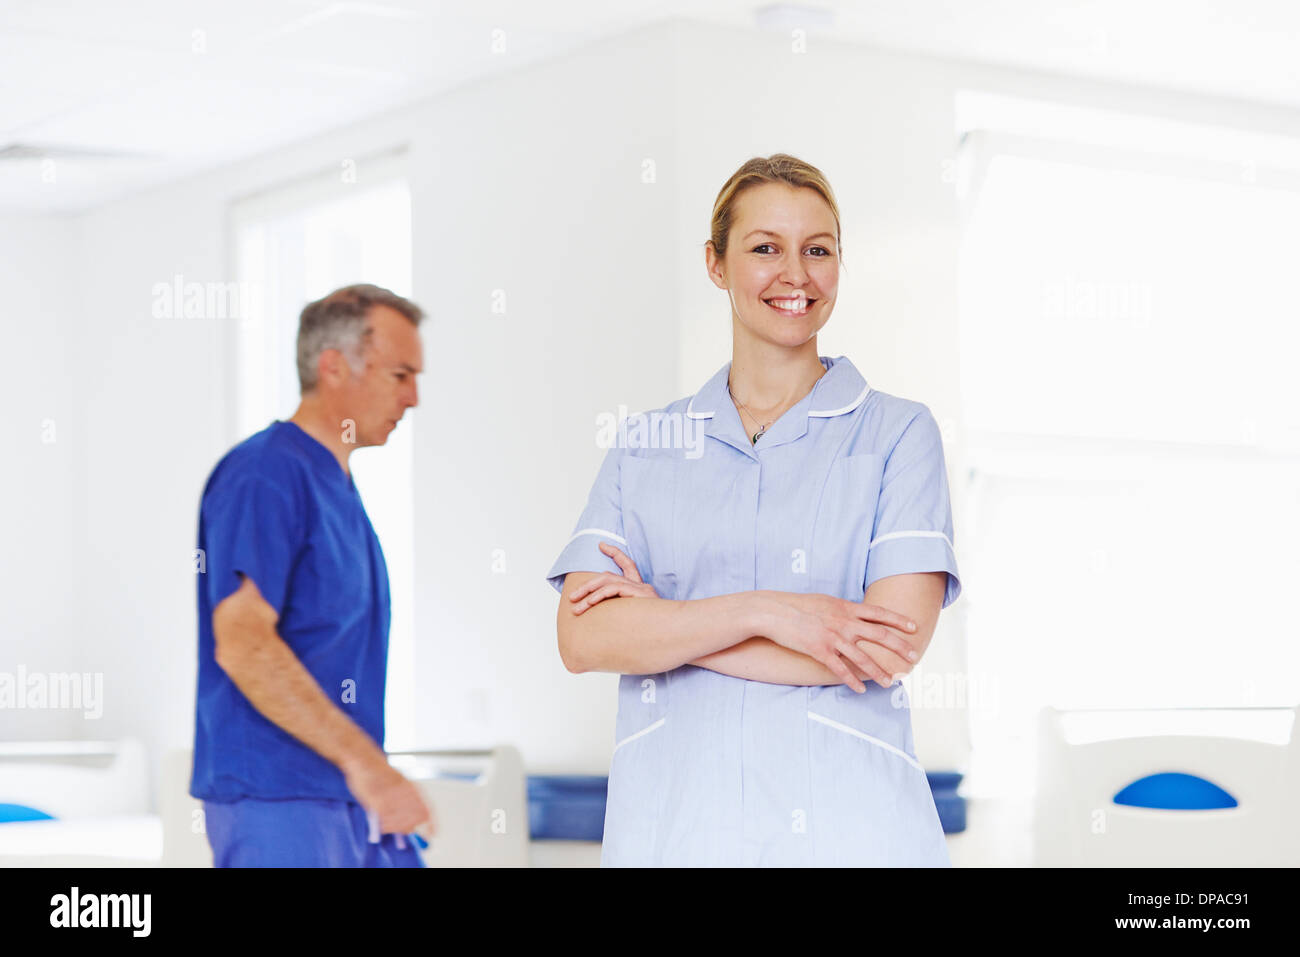 Portrait of nurse with doctor in background Stock Photo